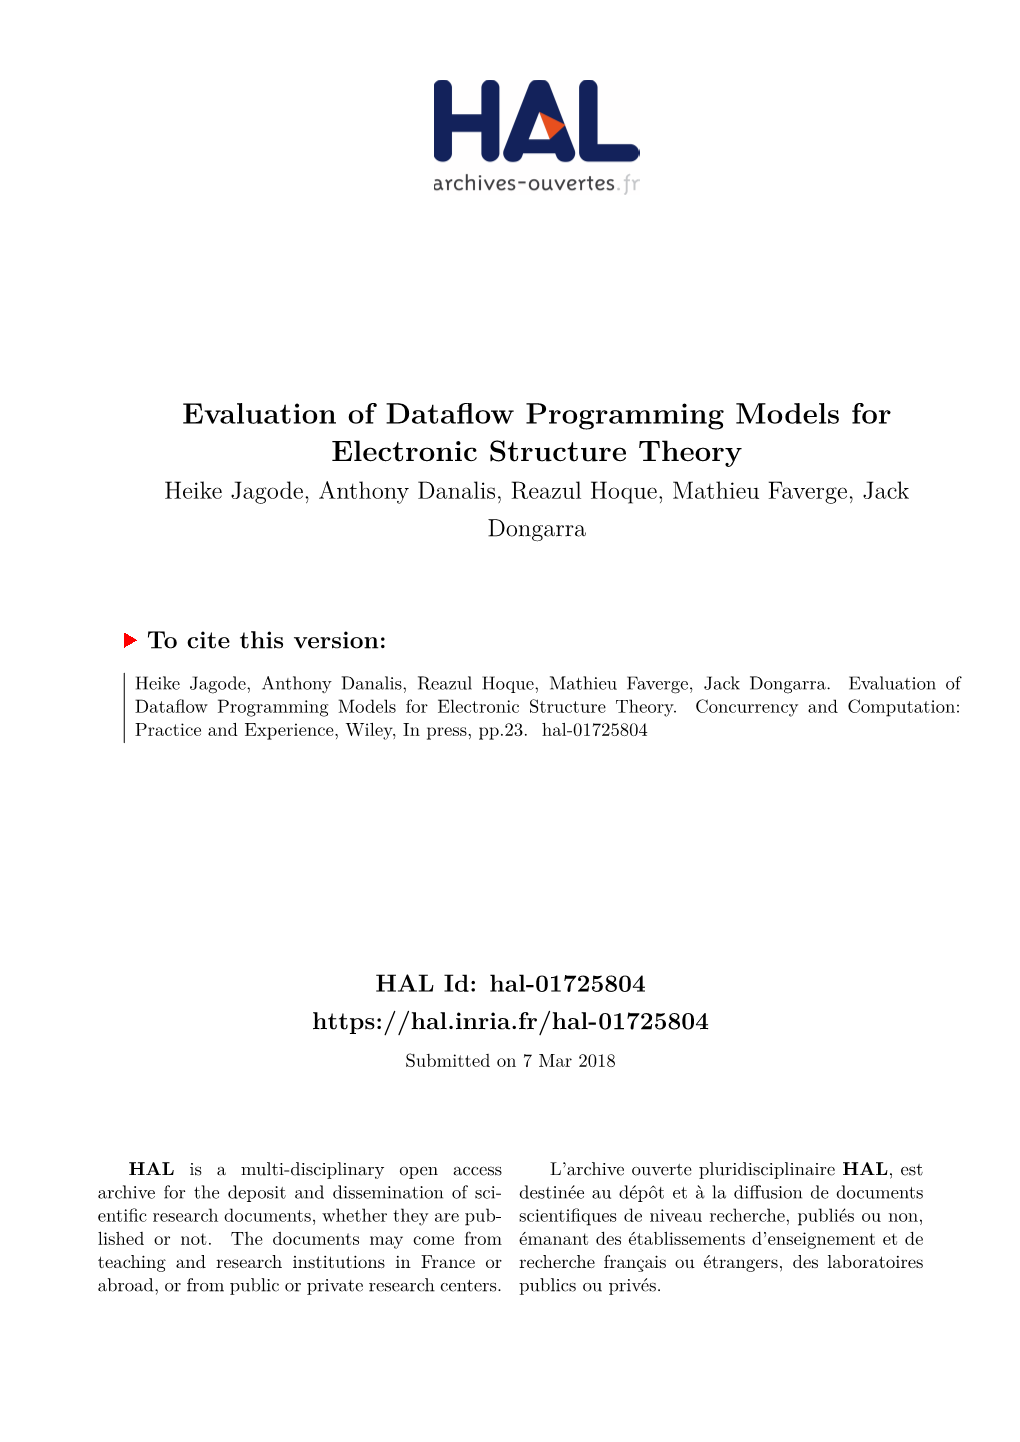 Evaluation of Dataflow Programming Models for Electronic Structure Theory Heike Jagode, Anthony Danalis, Reazul Hoque, Mathieu Faverge, Jack Dongarra